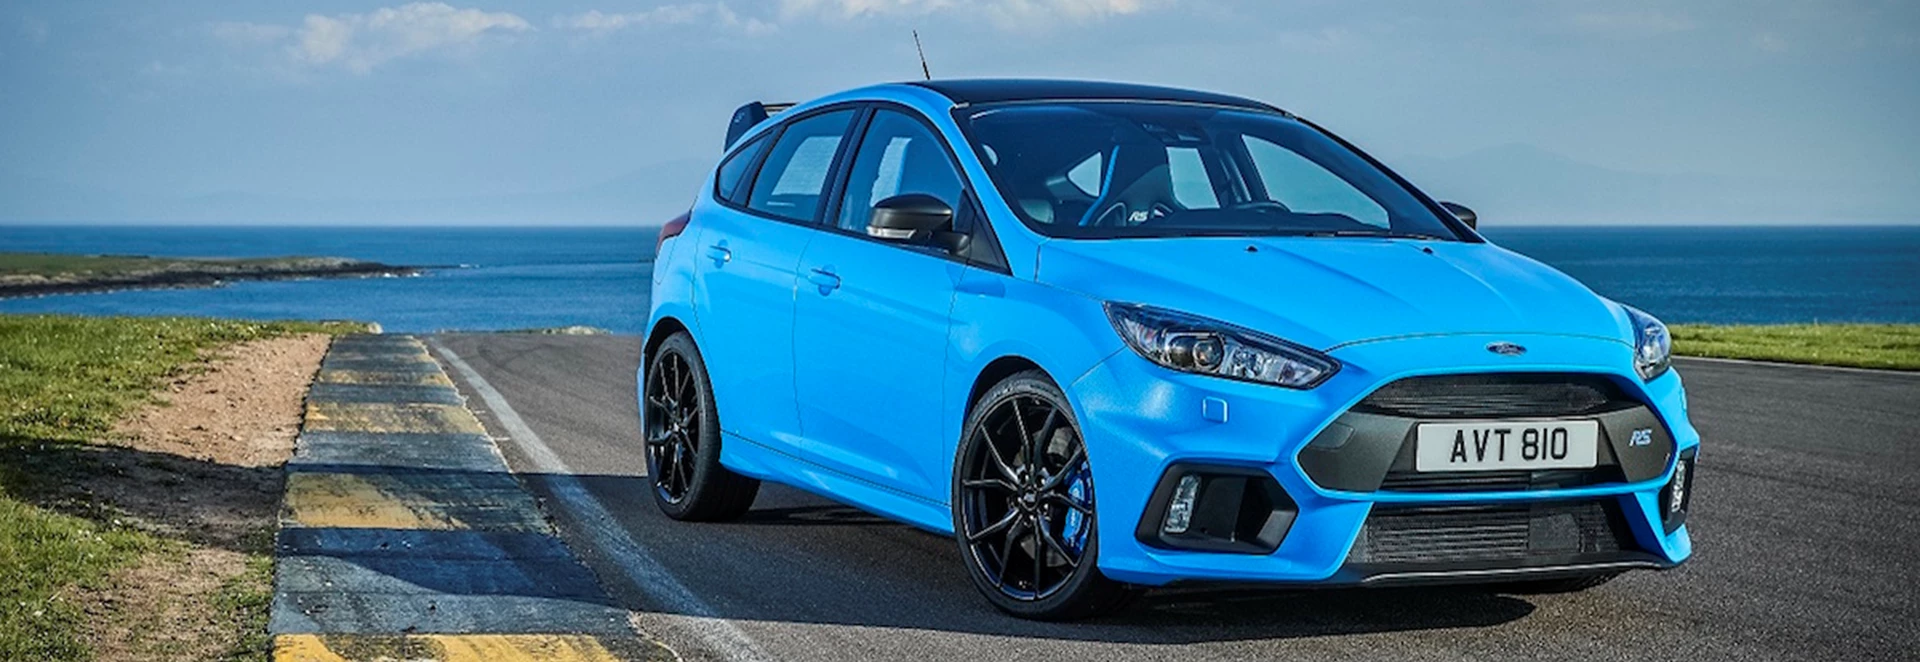 Ford releases details of Focus RS Edition 